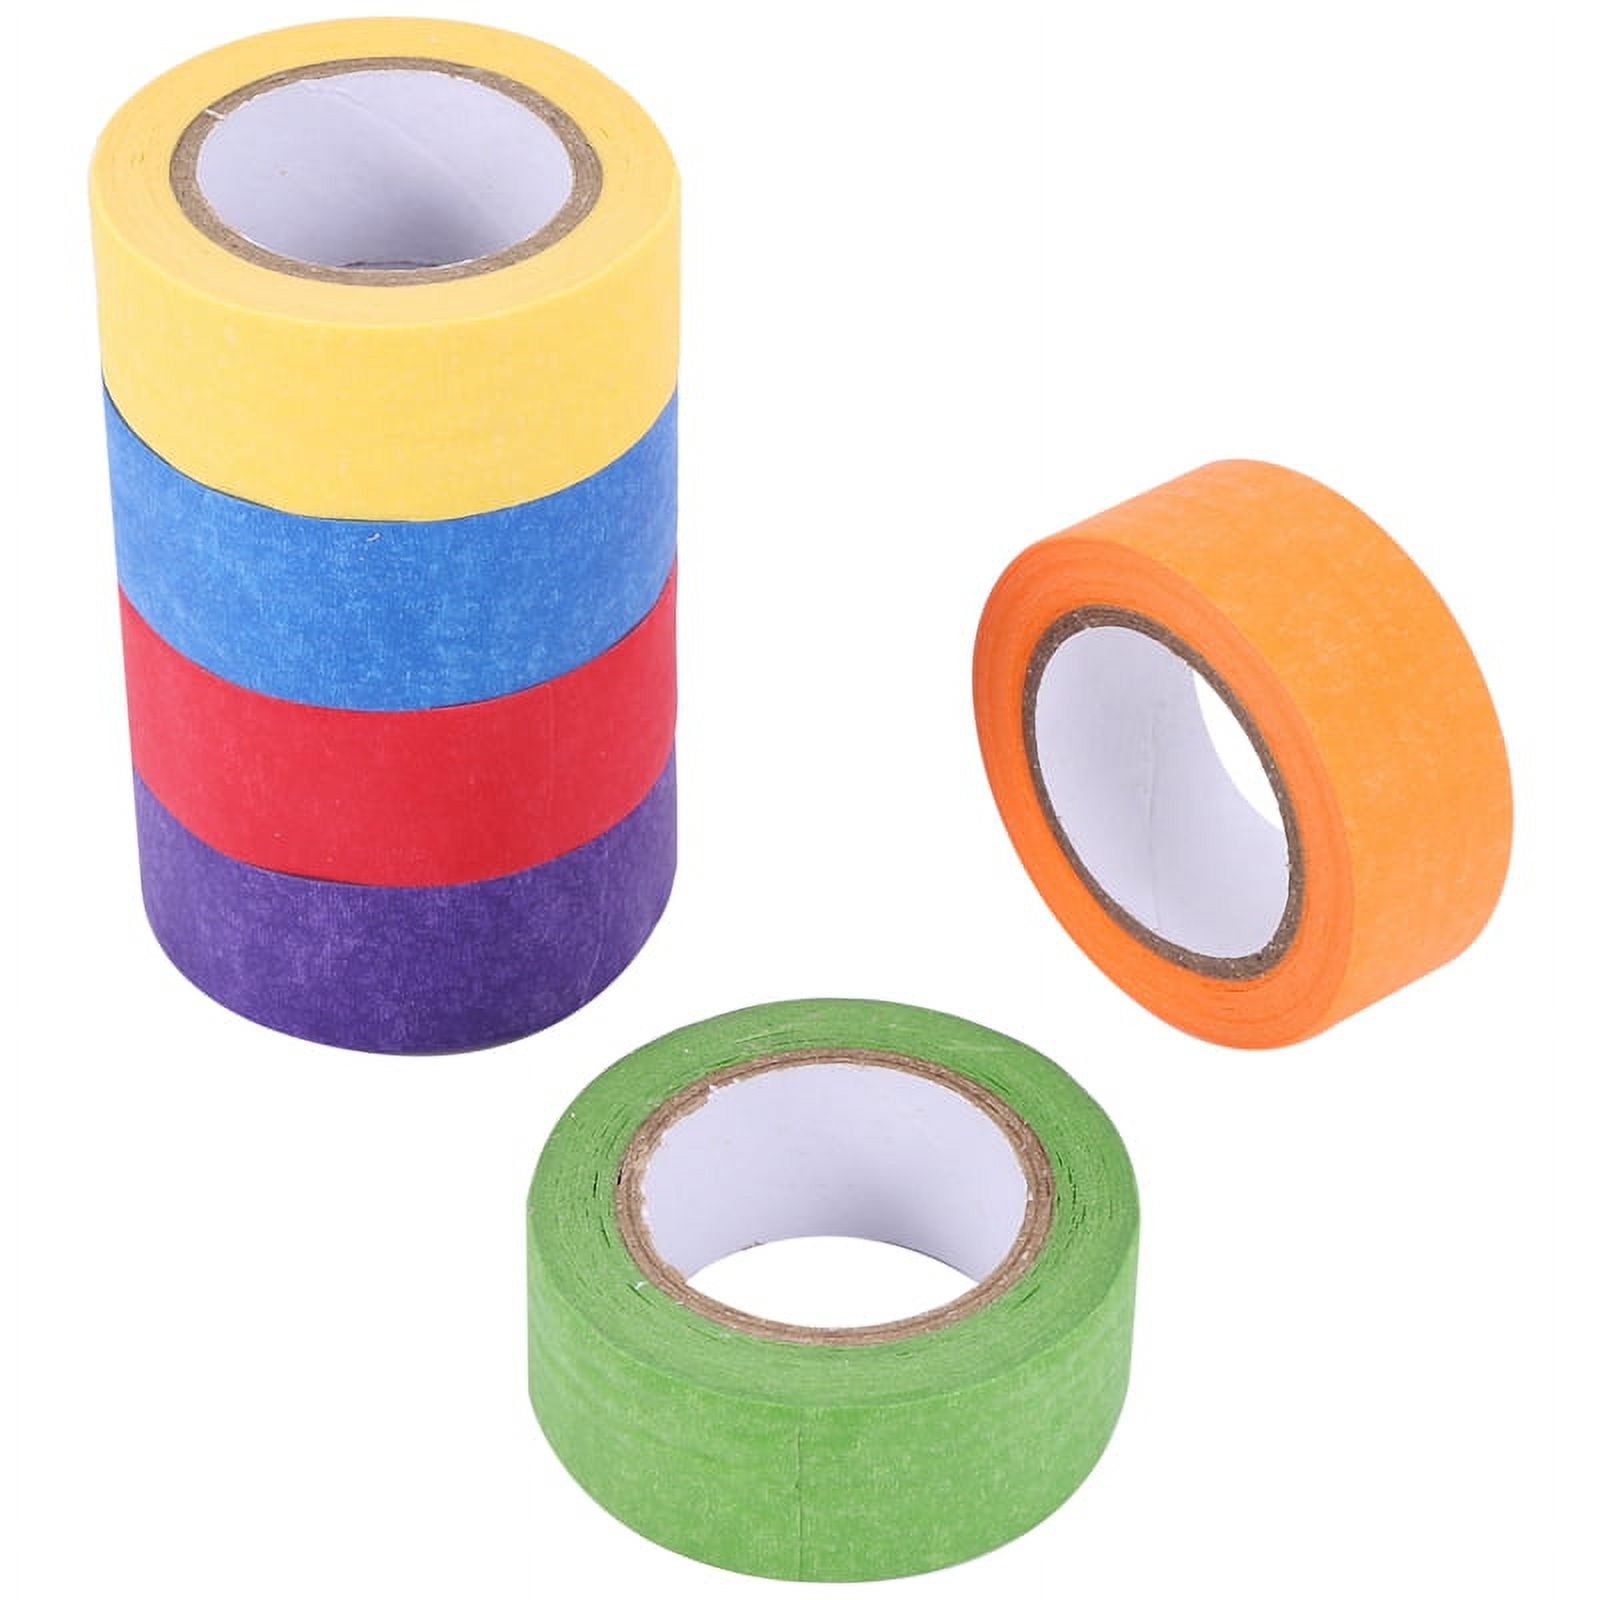 Colored Masking Tape,Colored Painters Tape for Arts and Crafts, Labeling or  Coding - 6 Different Color - Masking Tape 1 Inch X 13 Yards (2.4Cm X 12M)